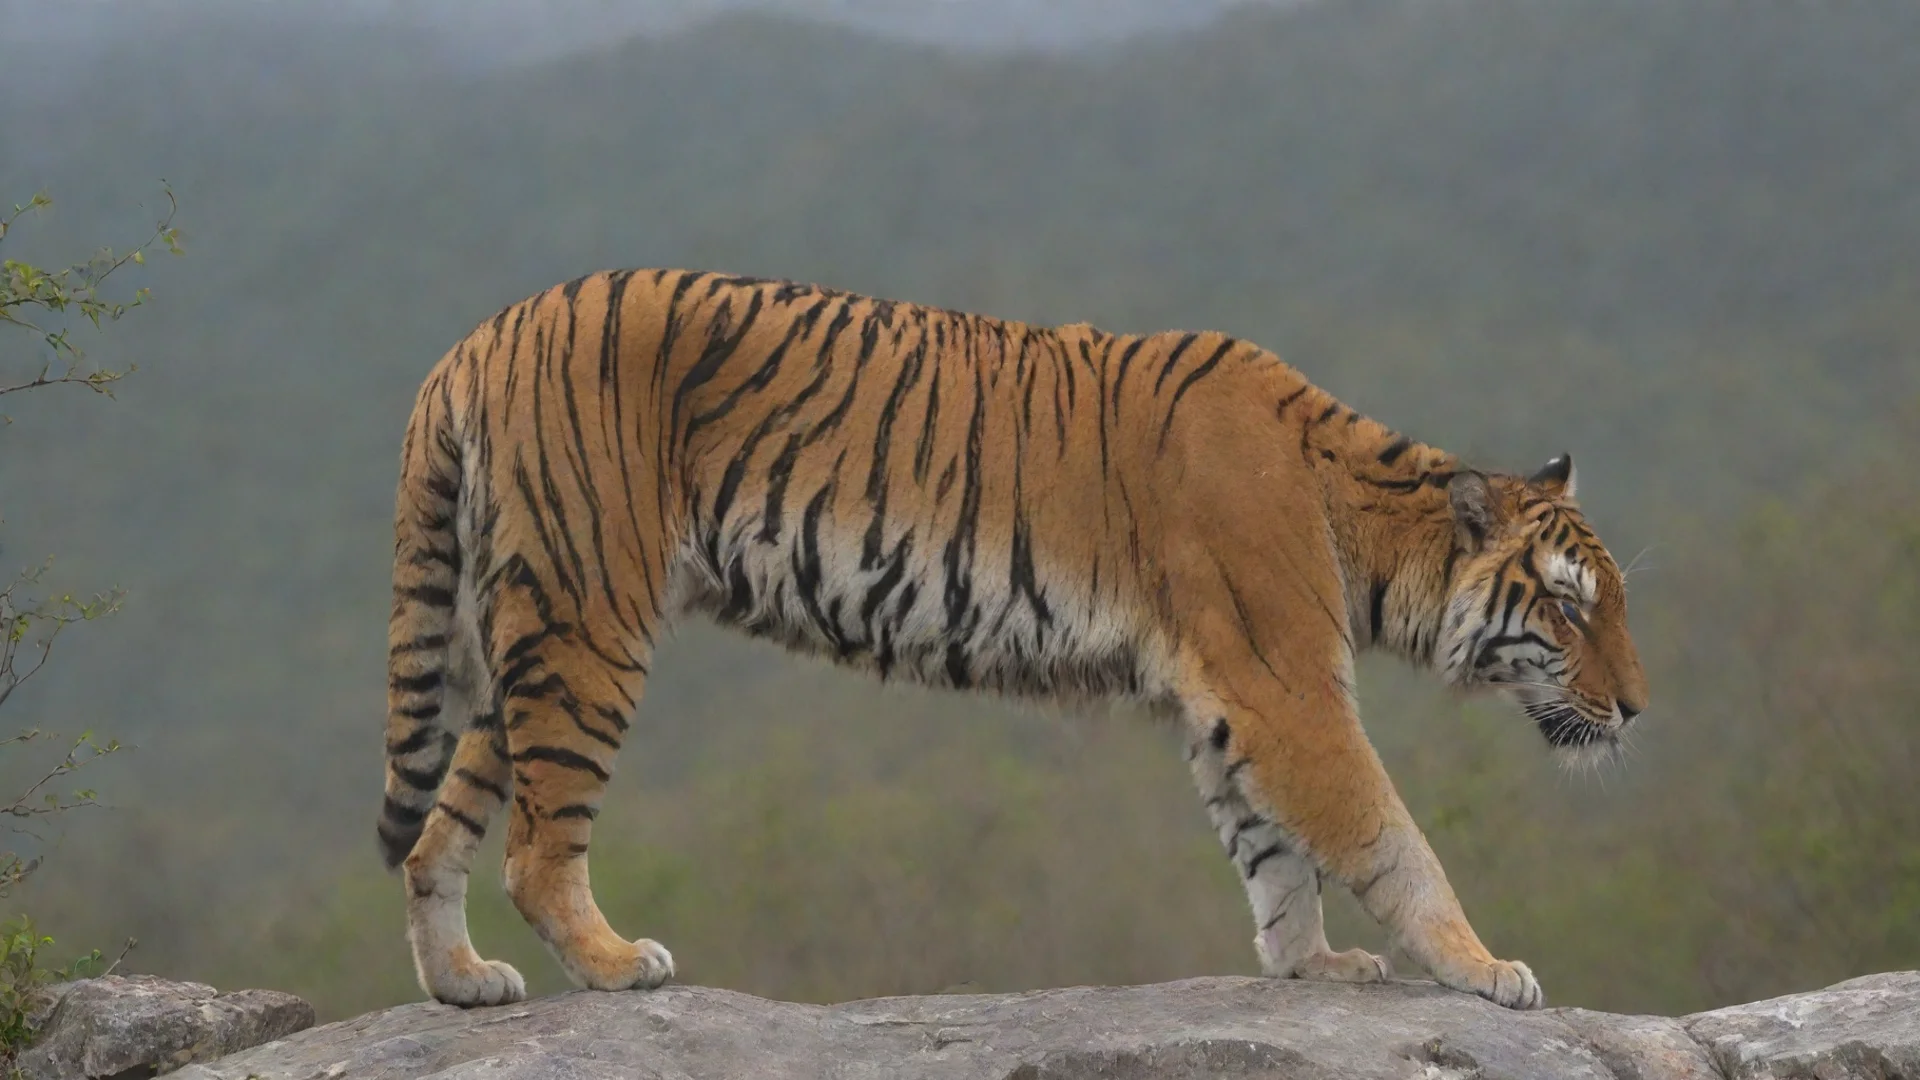 aiamazing tiger ona mountain awesome portrait 2 wide